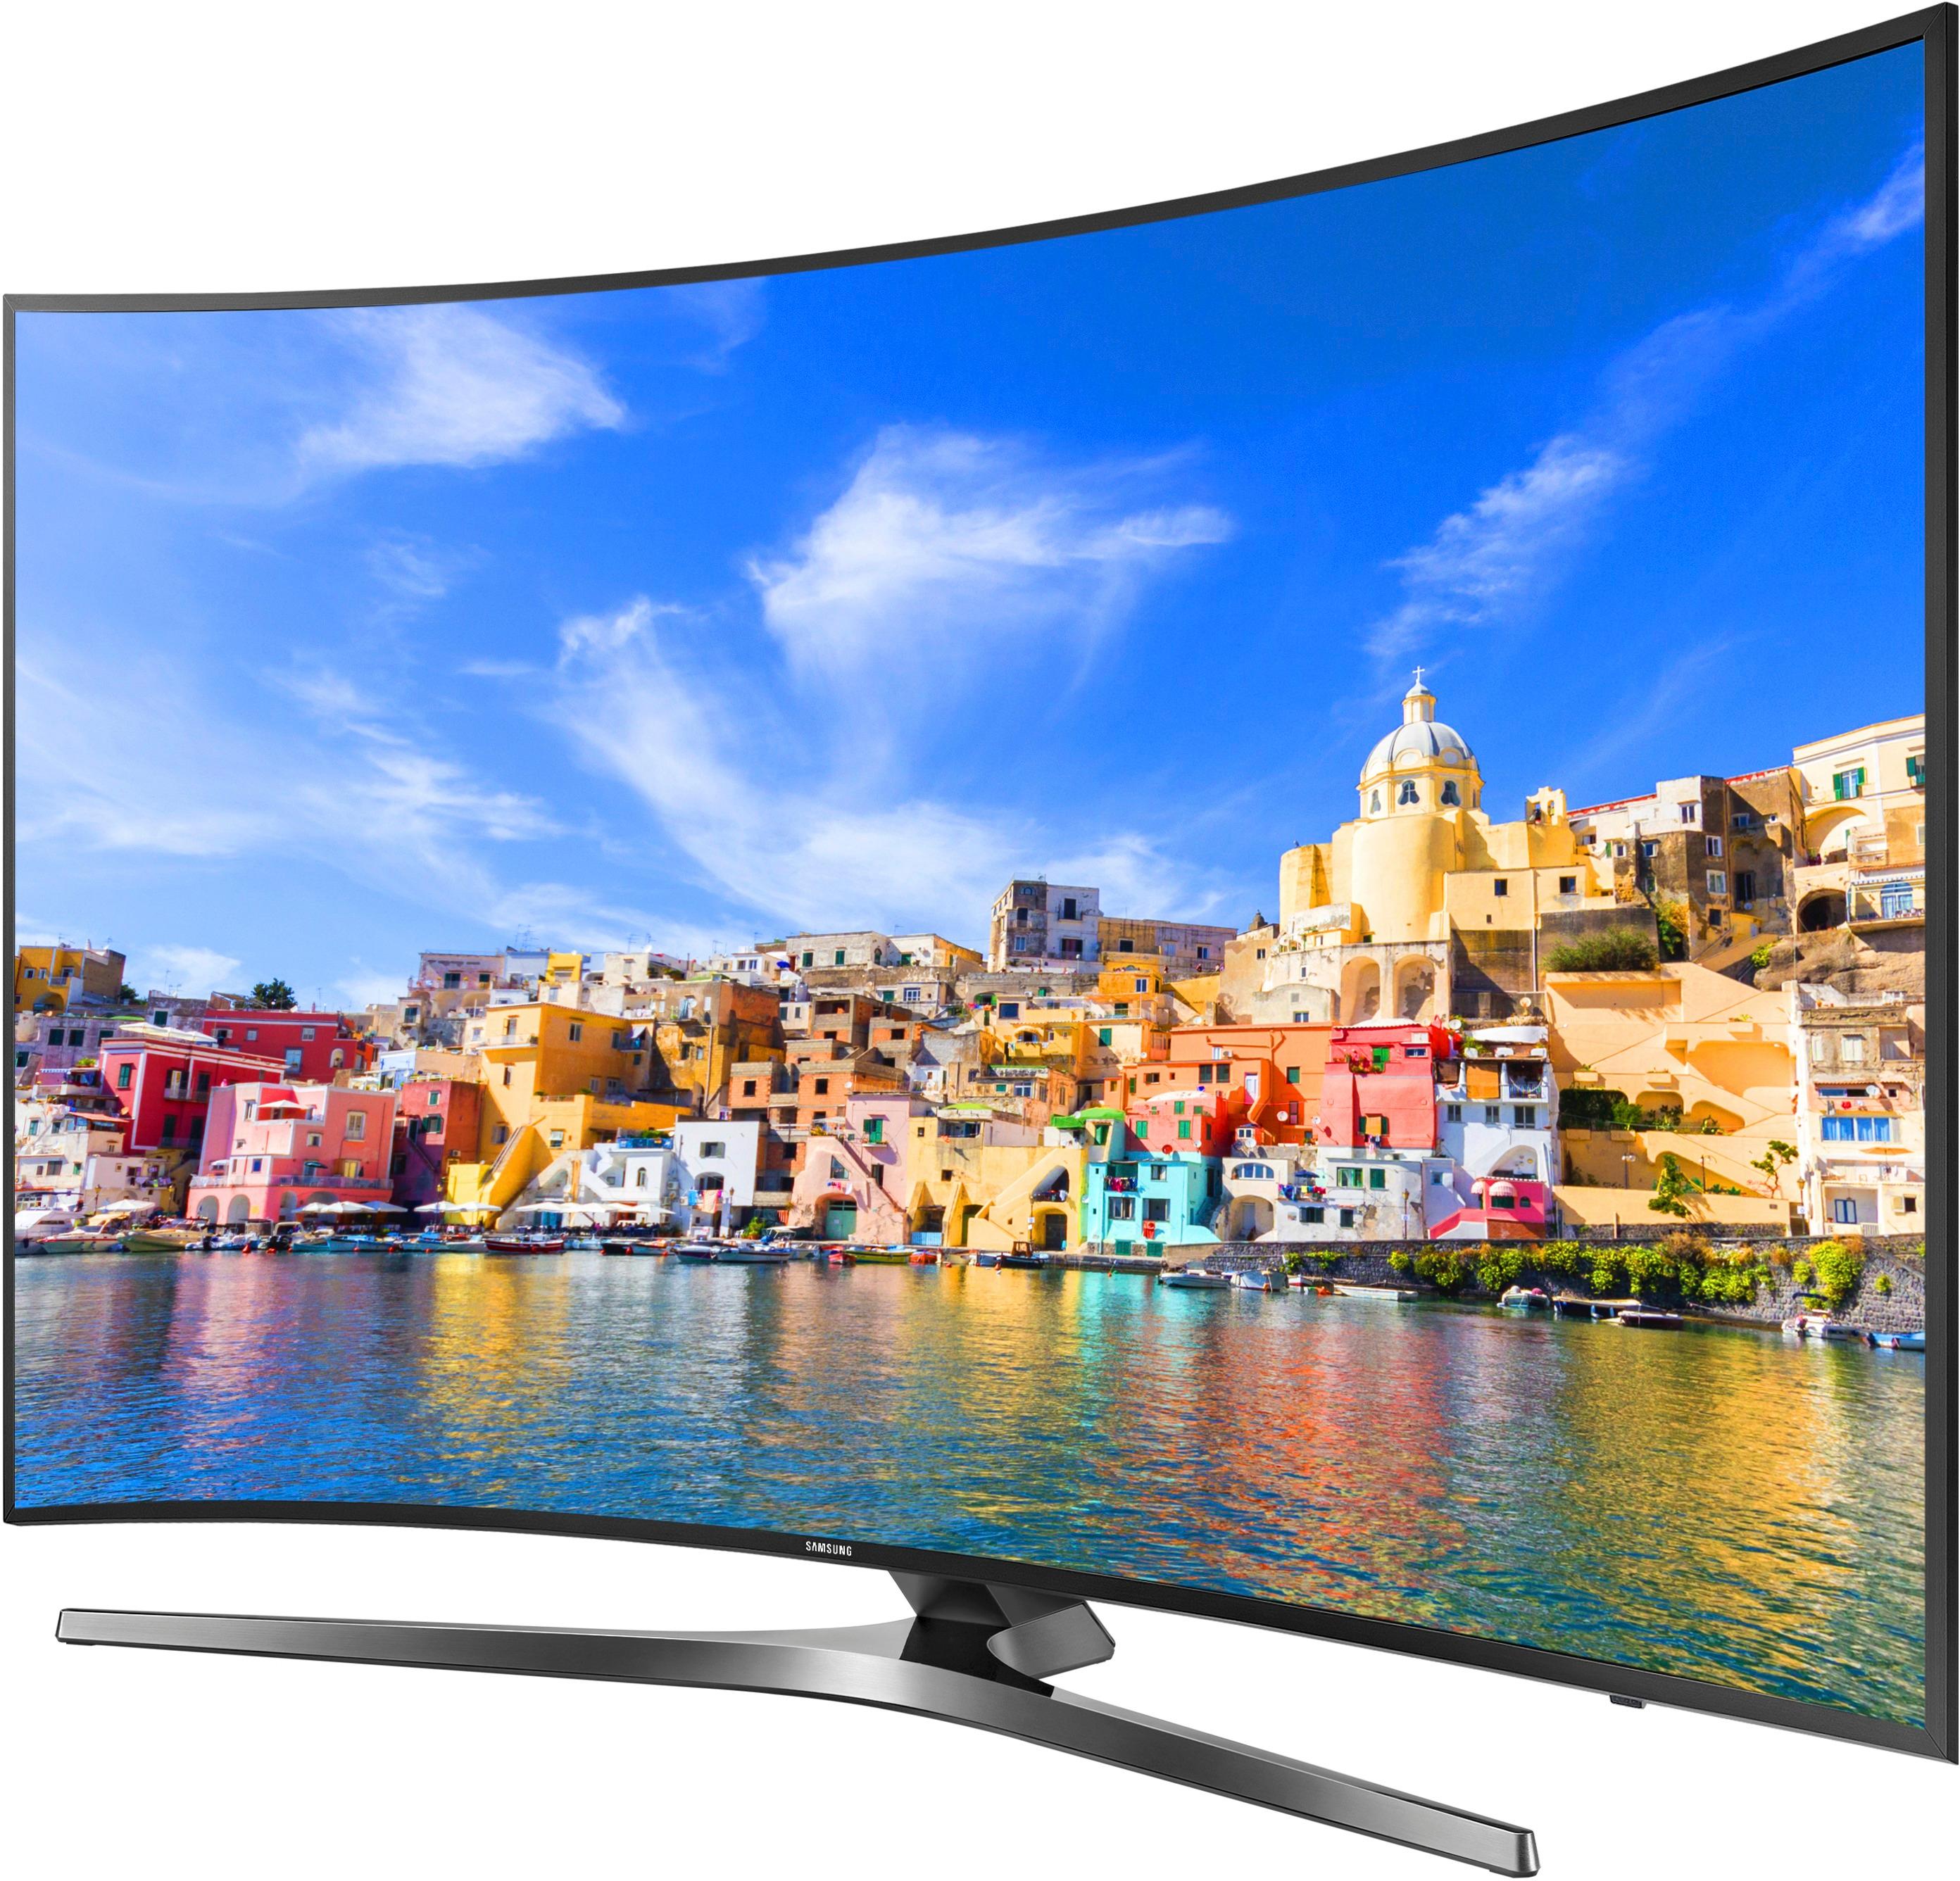 Customer Reviews Samsung 43" Class (42.5" Diag.) LED Curved 2160p